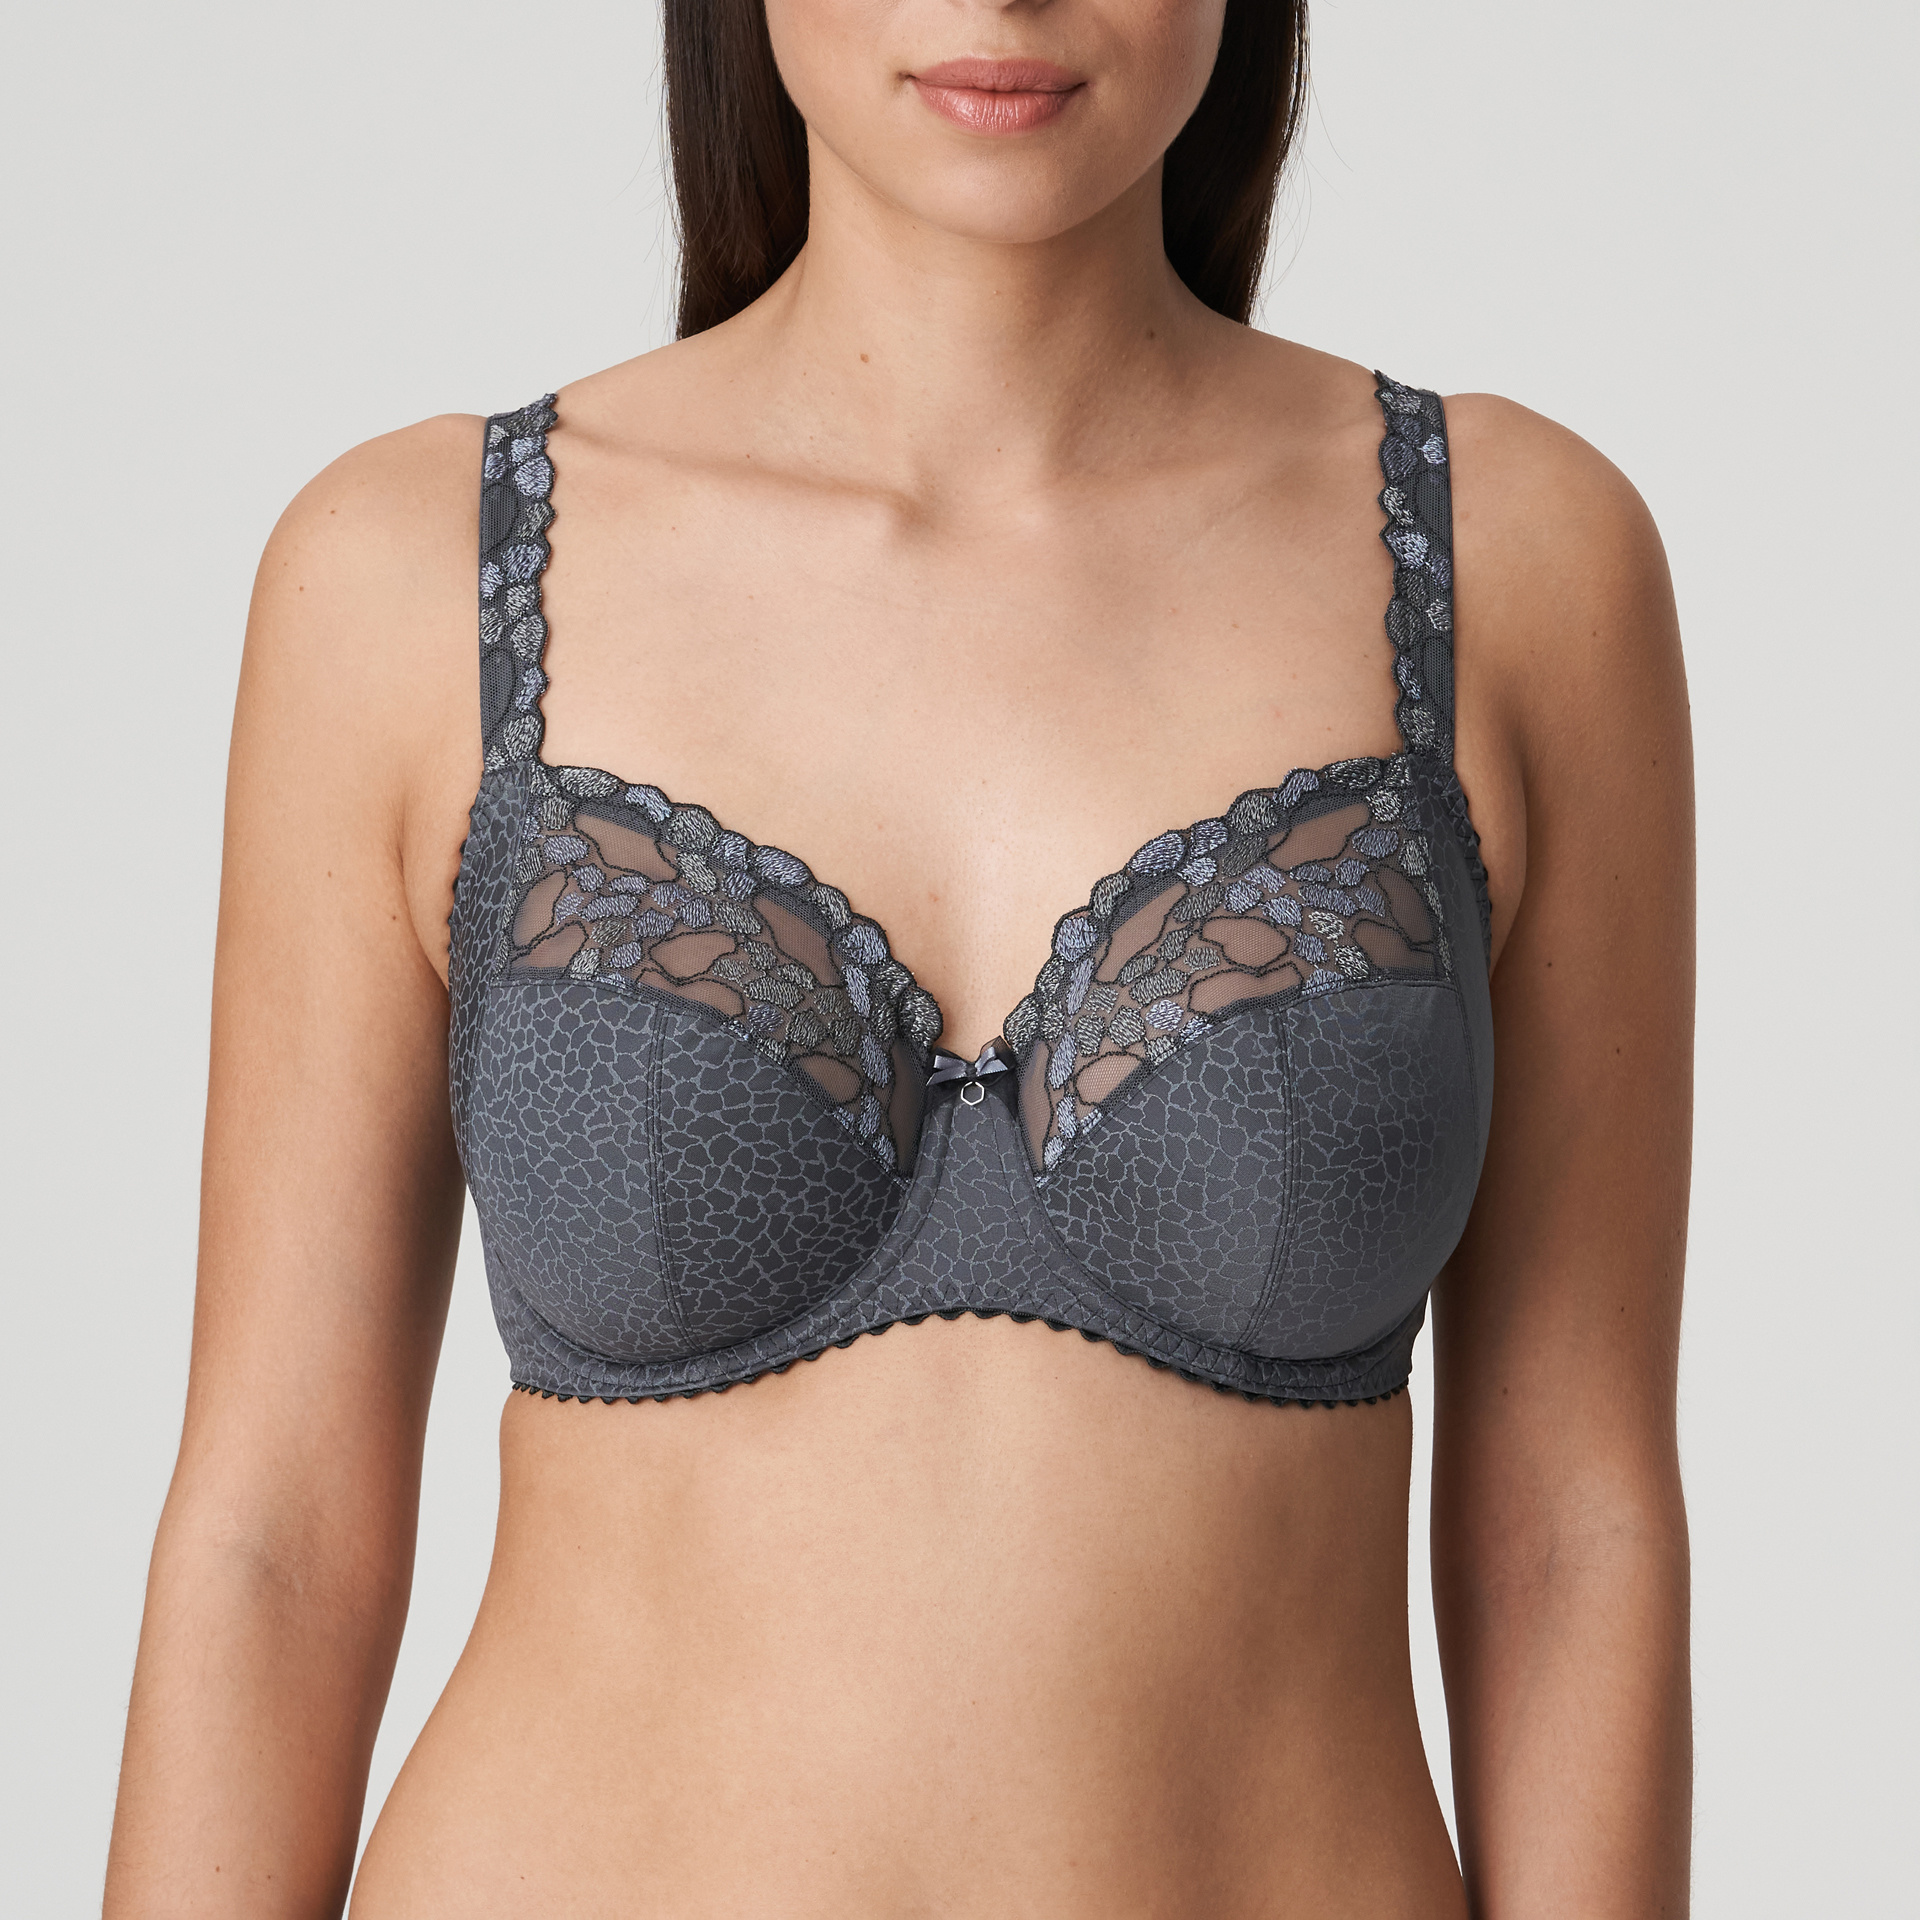 Hyde Park Full Cup Bra Gris City 0163200 - Lace & Day